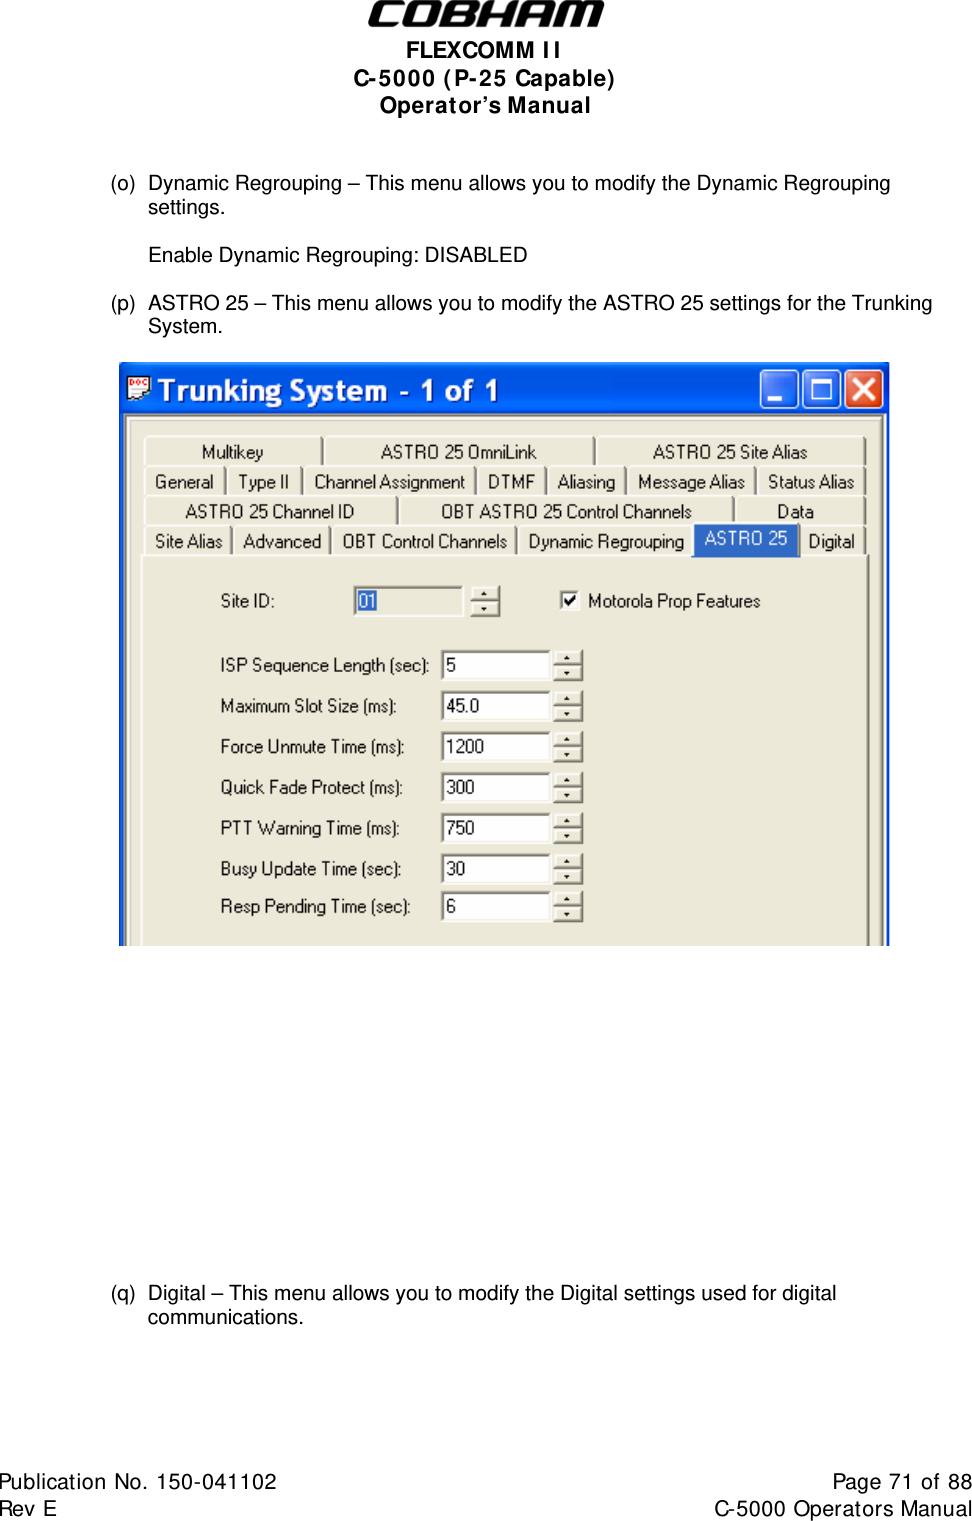  FLEXCOMM II C-5000 (P-25 Capable) Operator’s Manual   (o)  Dynamic Regrouping – This menu allows you to modify the Dynamic Regrouping settings.    Enable Dynamic Regrouping: DISABLED  (p)  ASTRO 25 – This menu allows you to modify the ASTRO 25 settings for the Trunking System.                    (q)  Digital – This menu allows you to modify the Digital settings used for digital communications.  Publication No. 150-041102  Page 71 of 88  Rev E  C-5000 Operators Manual    